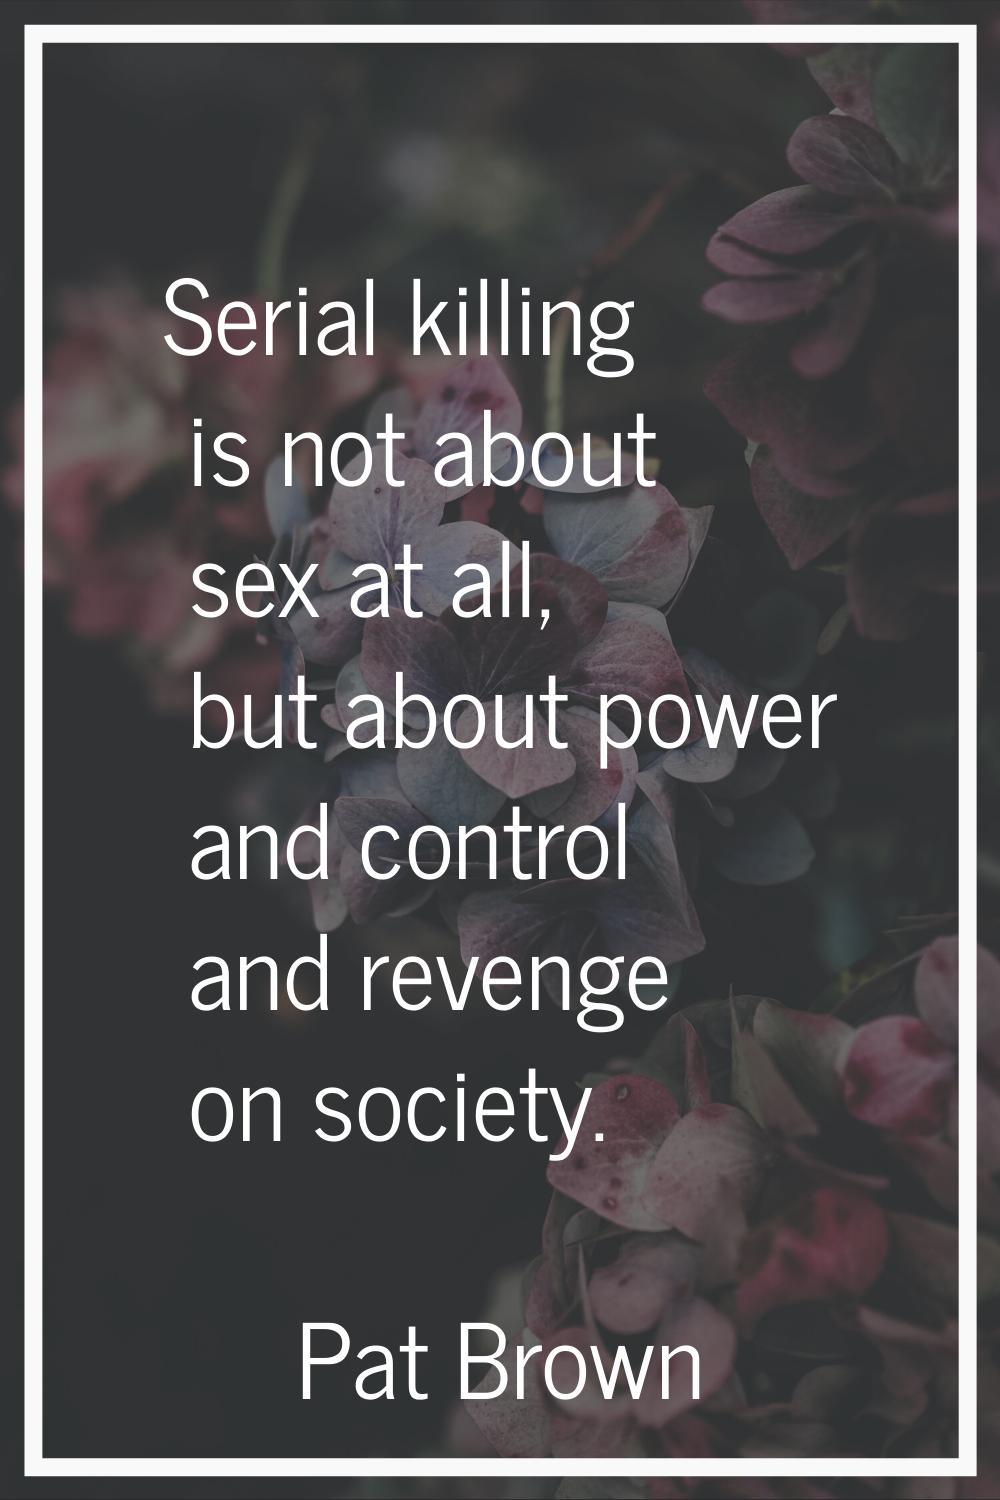 Serial killing is not about sex at all, but about power and control and revenge on society.